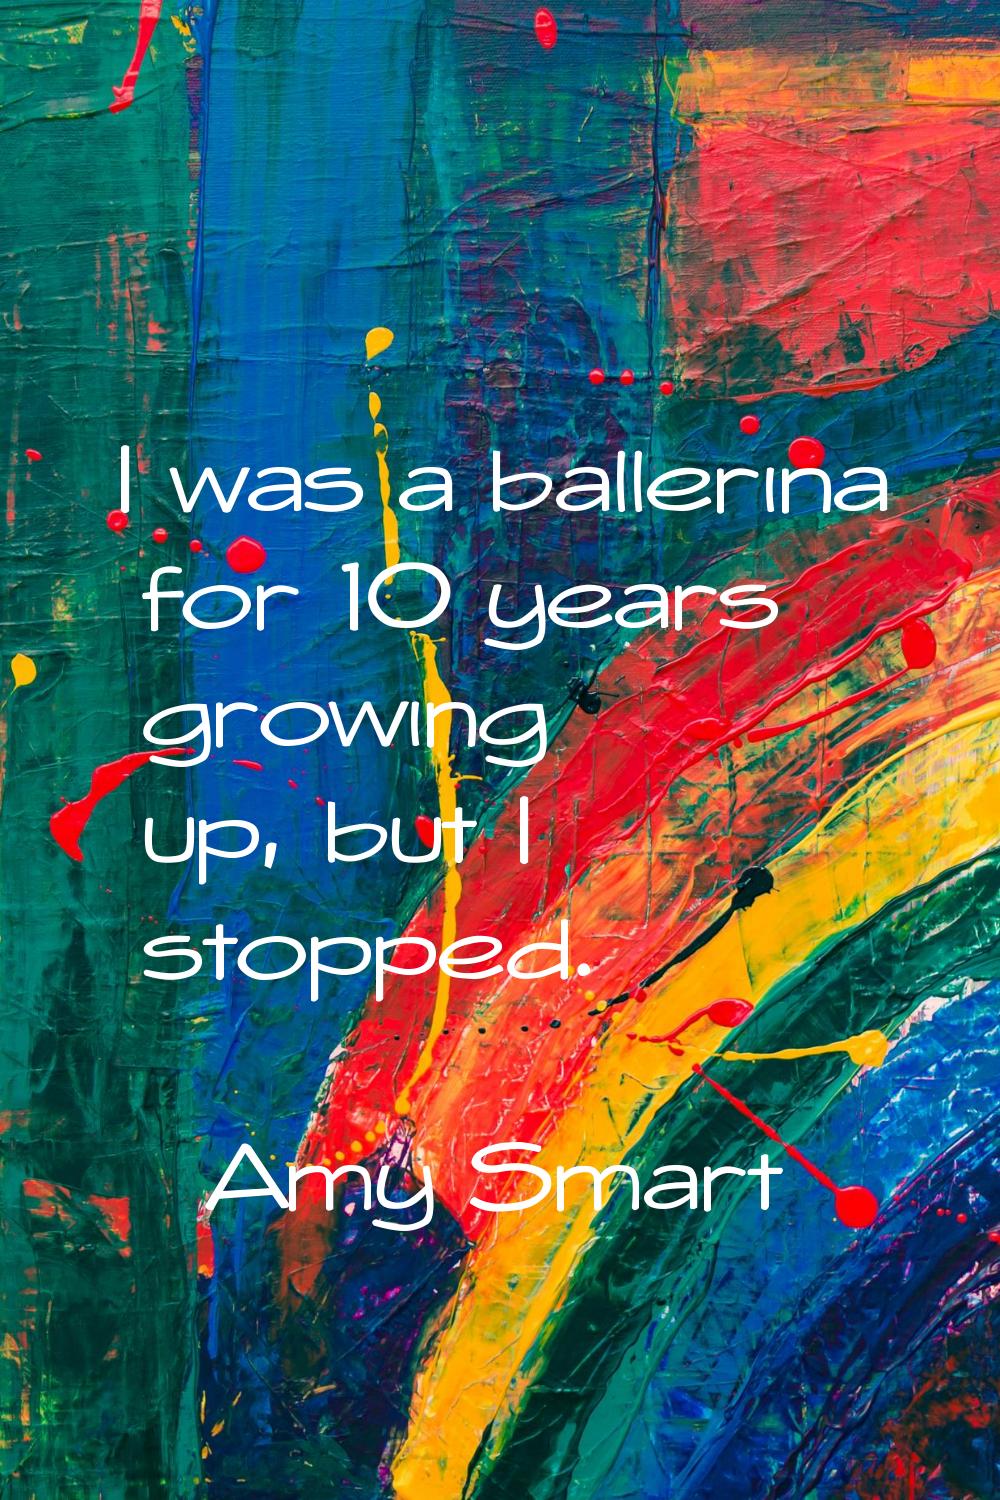 I was a ballerina for 10 years growing up, but I stopped.